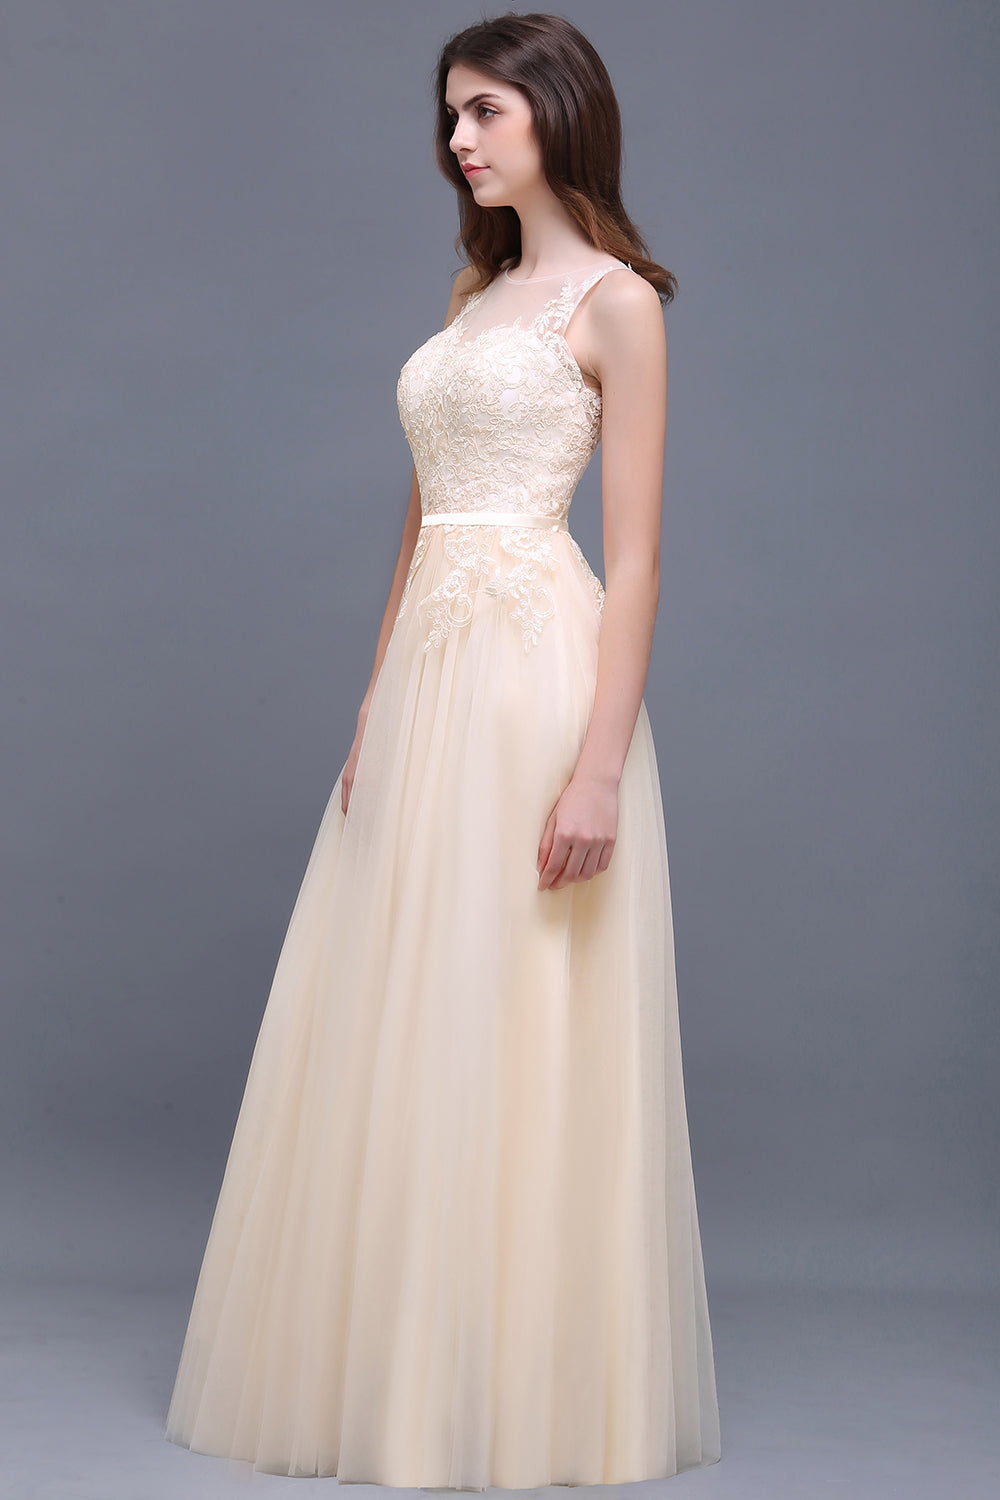 Elegant Tulle Lace Champagne Long Bridesmaid Dress With Appliques